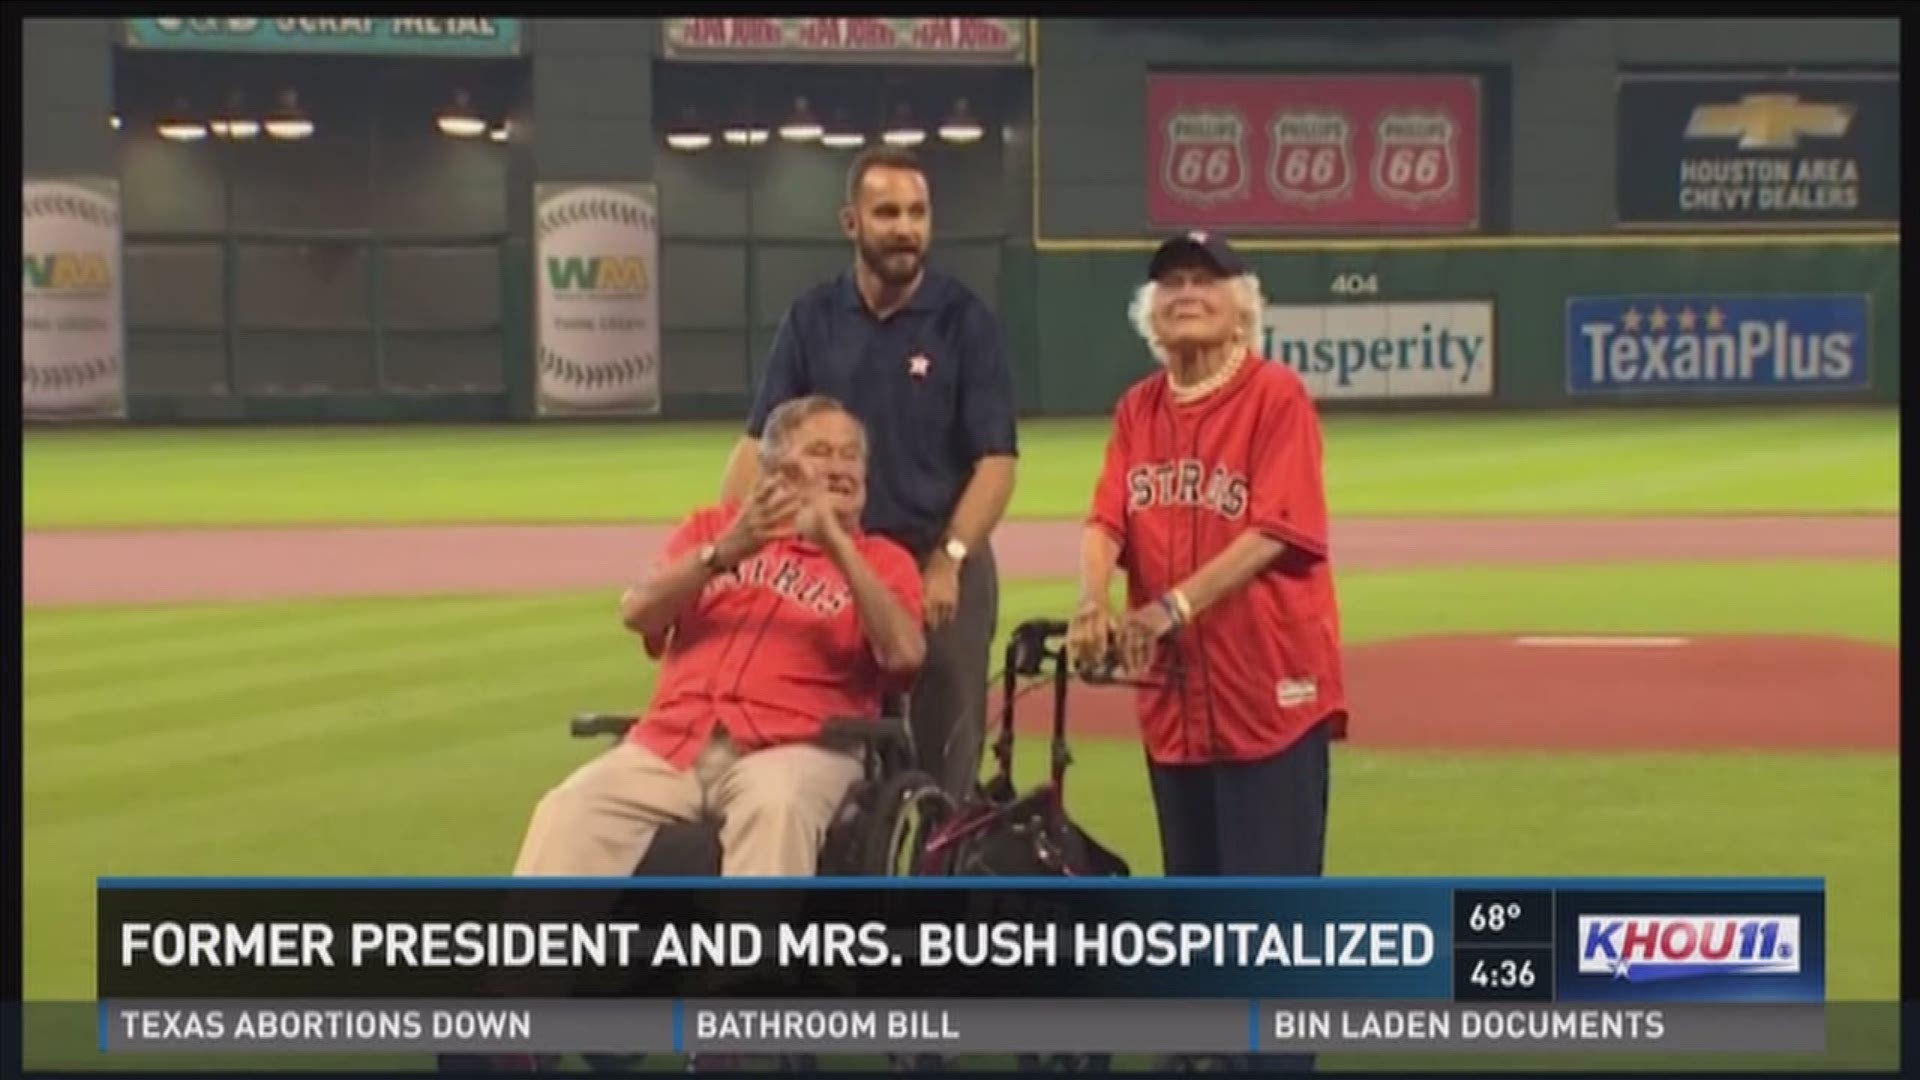 Former President George H.W. Bush remained intubated in the Intensive Care Unit at Houston Methodist Hospital as of Thursday morning. Mrs. Bush feels "1,000 percent better," according to their spokesman.